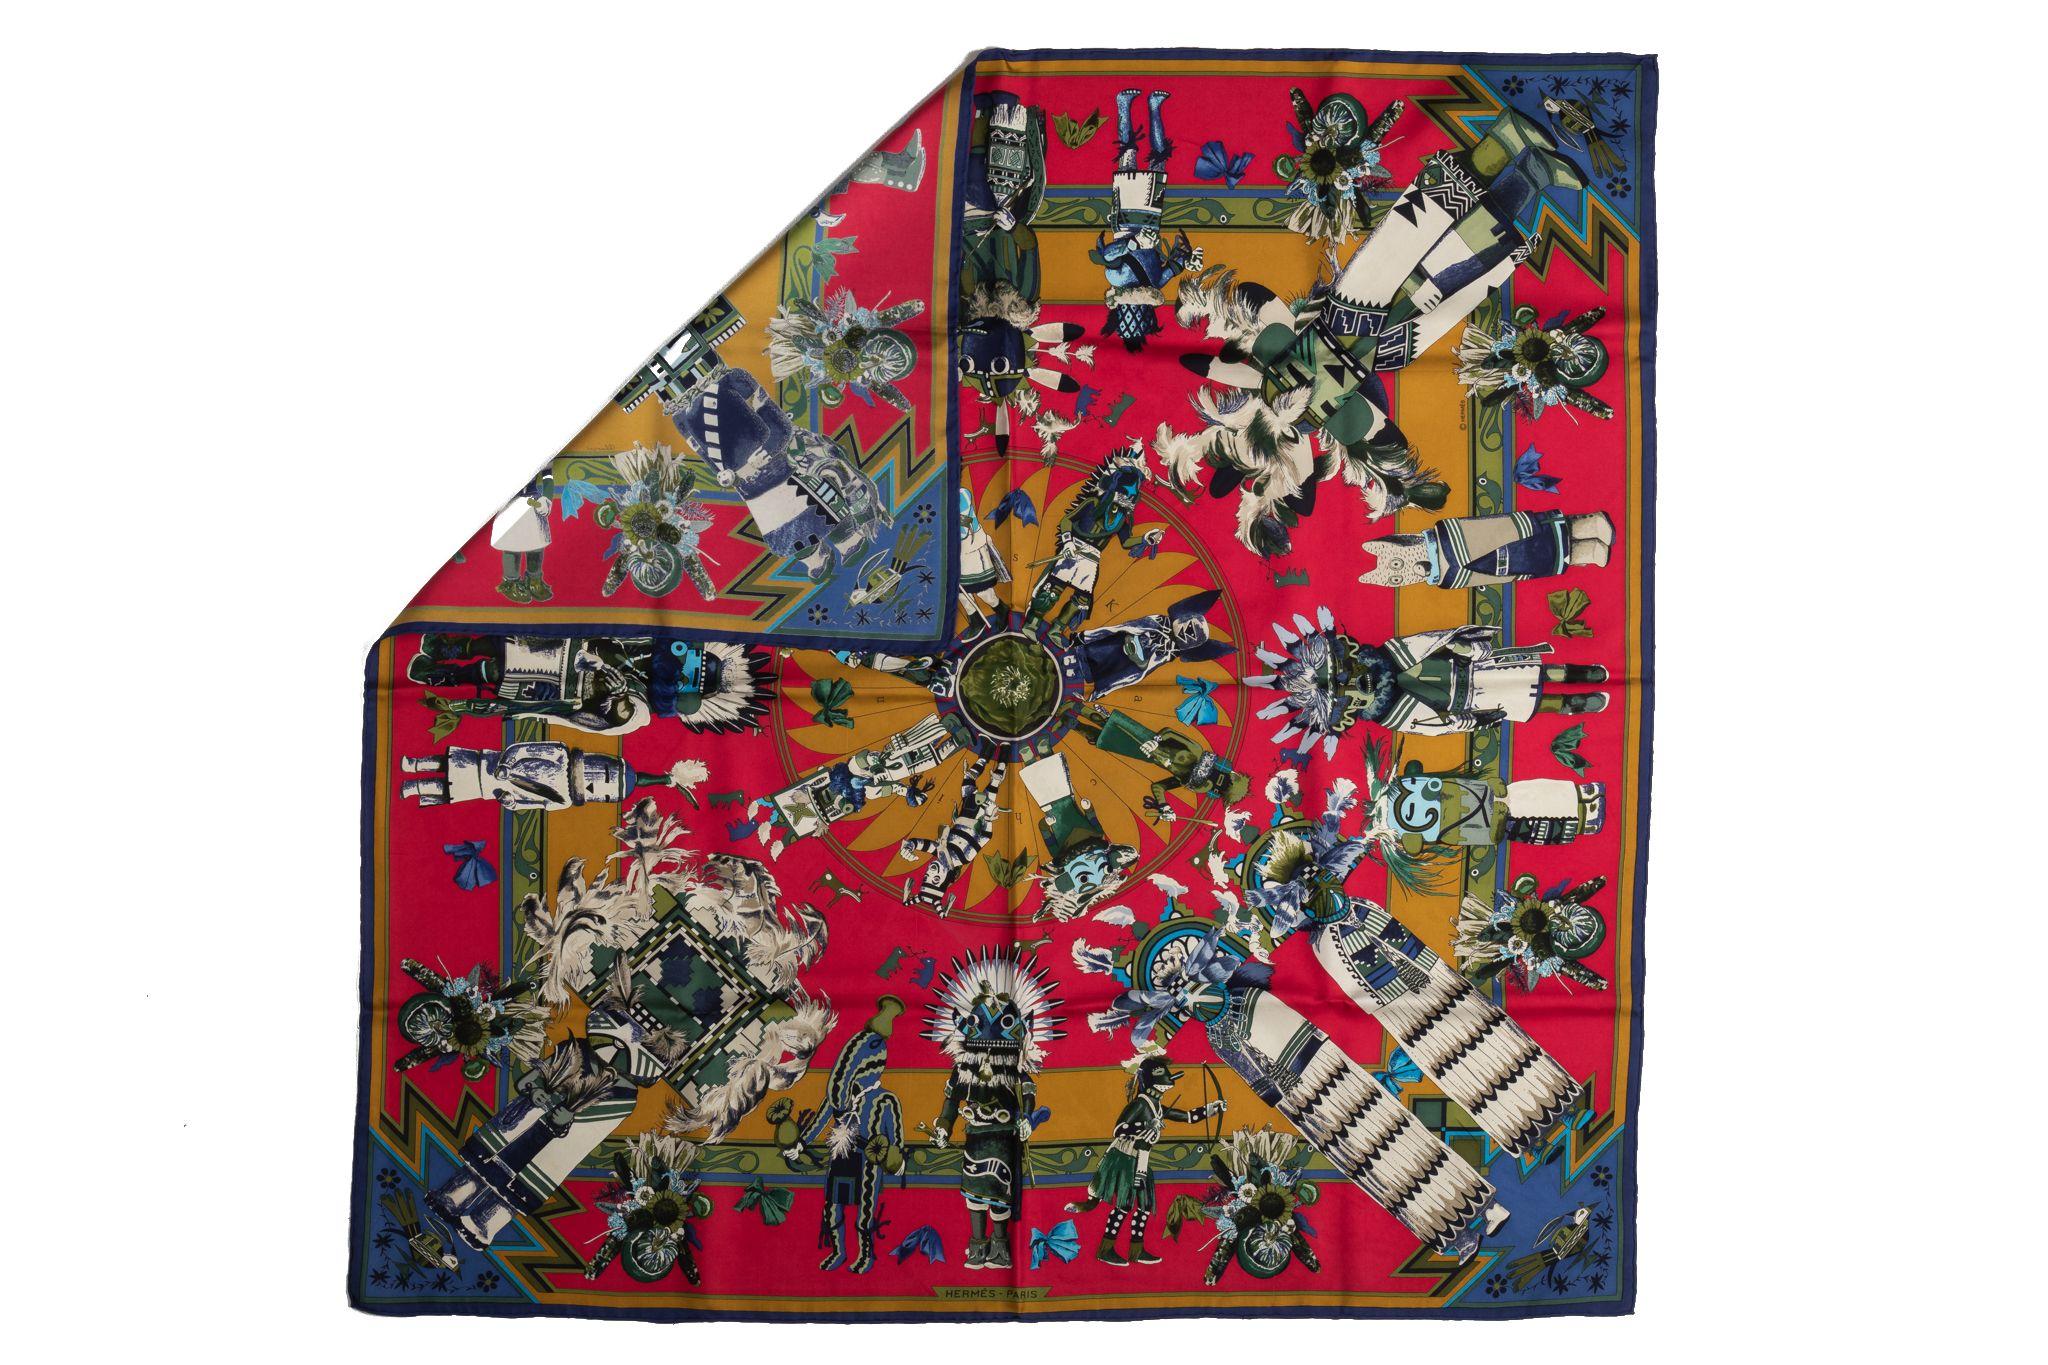 Hermès red and navy silk Kachinas scarf designed by Kermit Oliver. Hand-rolled edges. Original box included.
